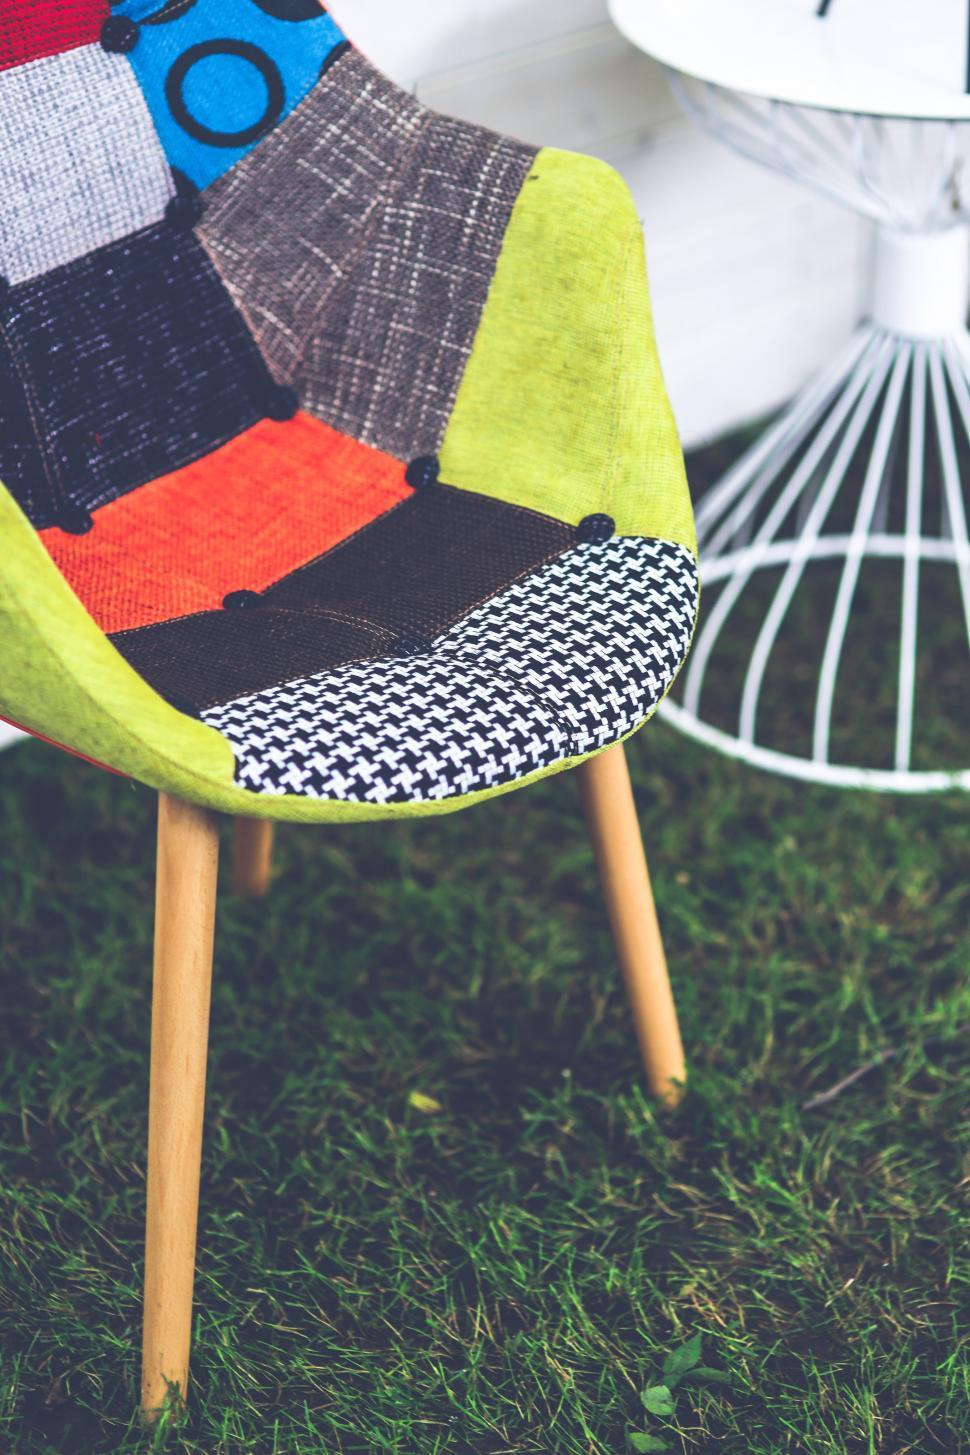 Free Image of Colorful Chair on Lush Green Field 